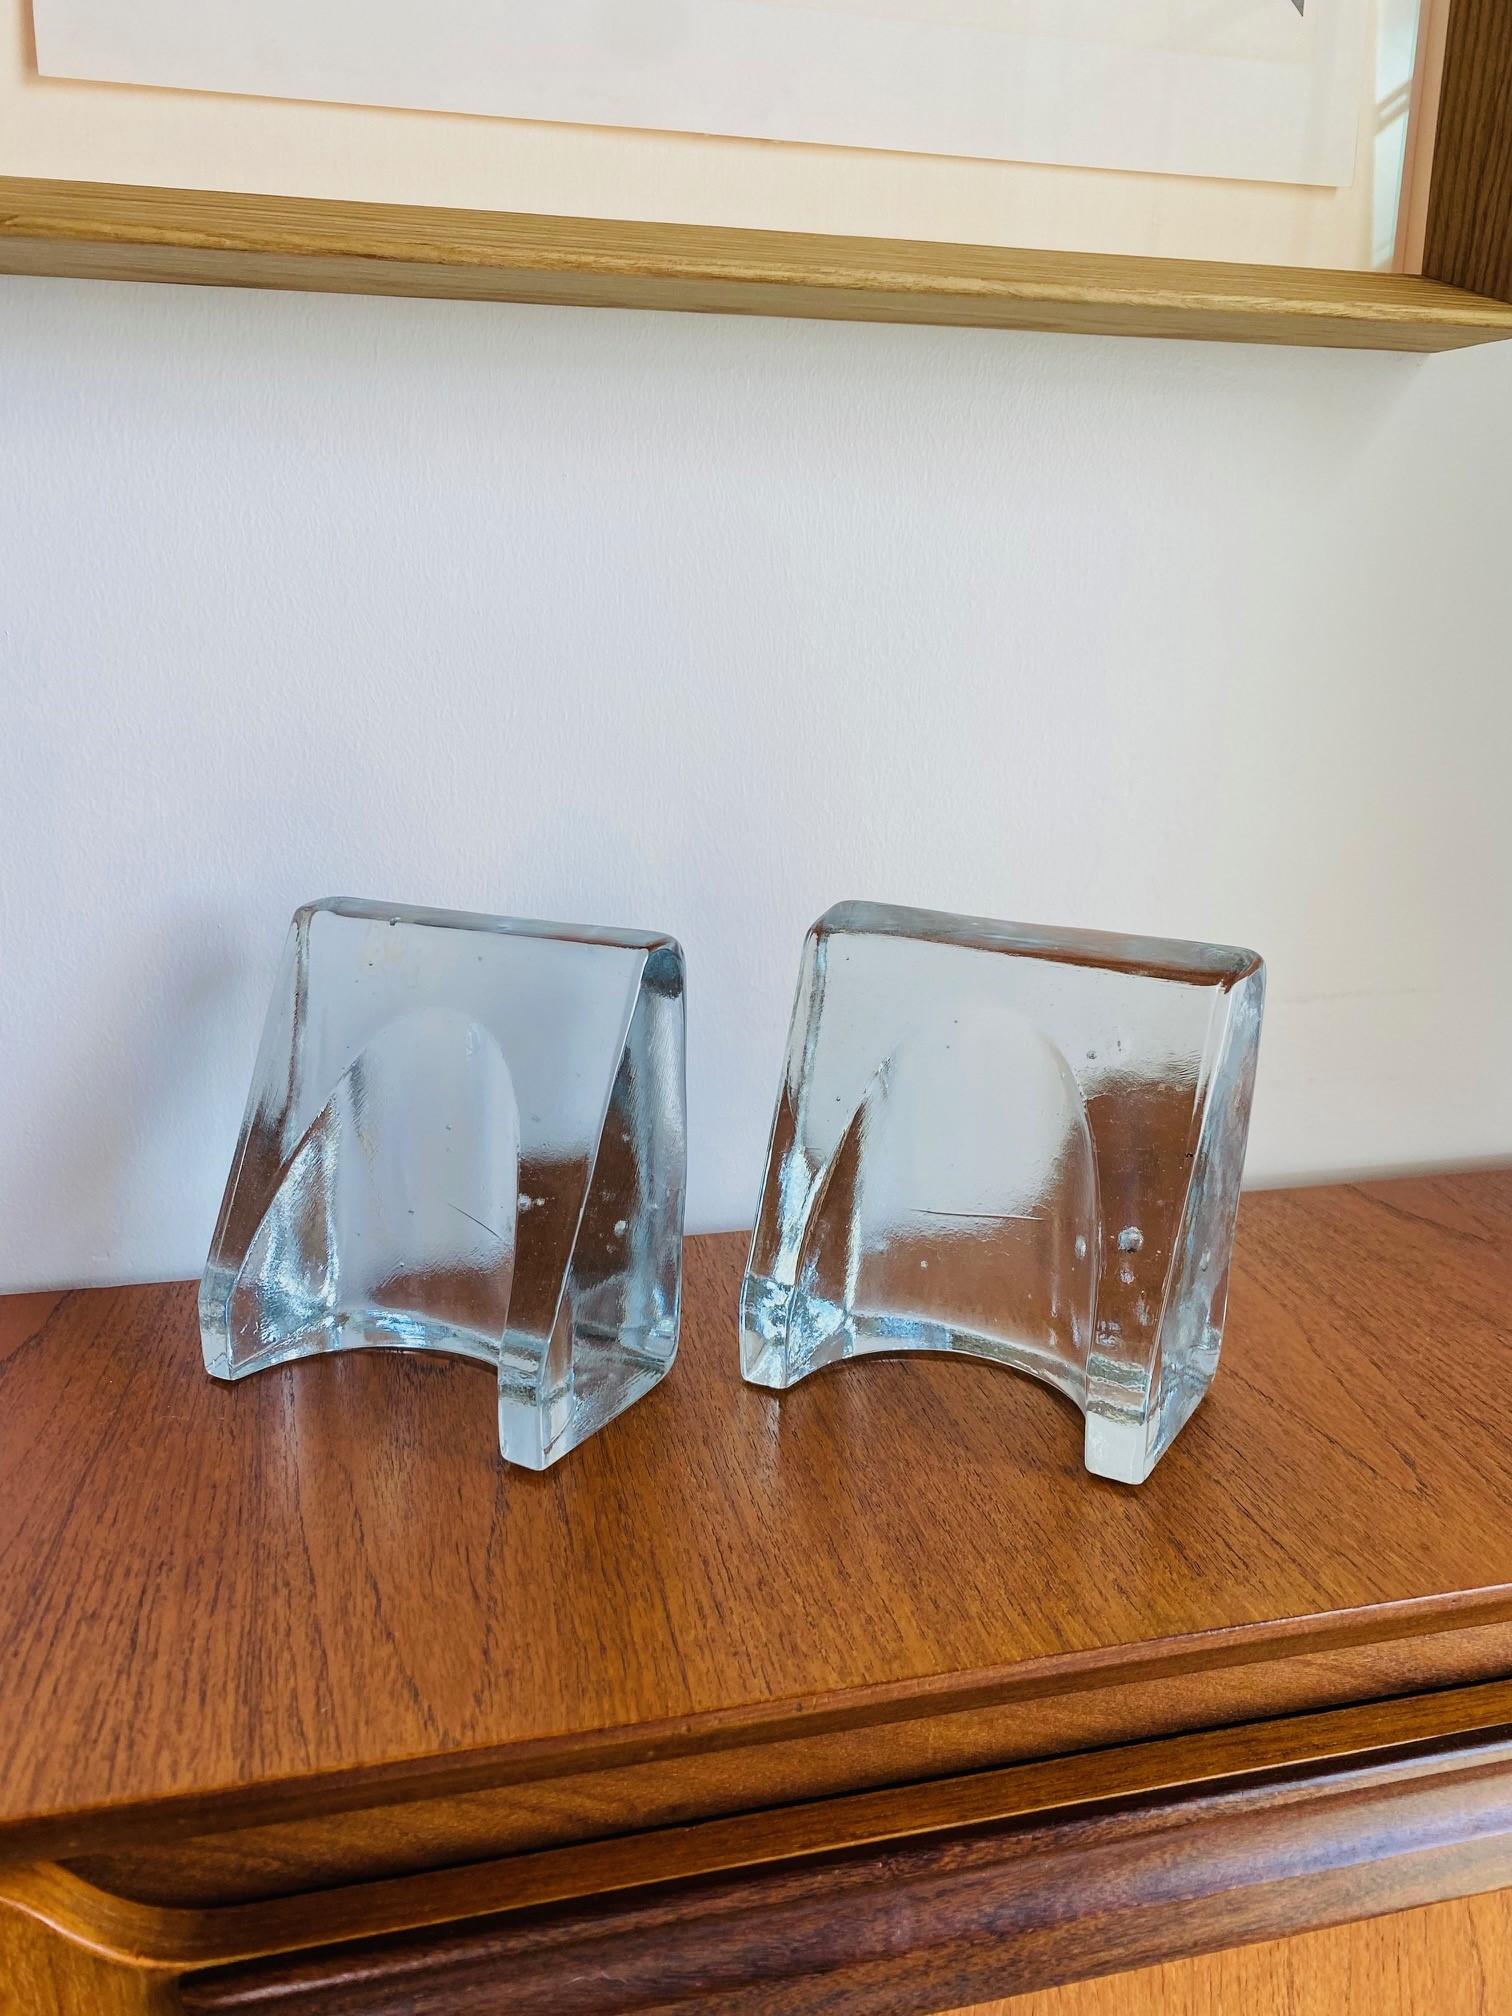 Midcentury glass sculptural pair of bookends designed by Wayne Husted for Blenko. Made of dense textured glass with shovel like design. Sculptural, unique and full ice like style. Each is handcrafted and complement a variety of styles. From